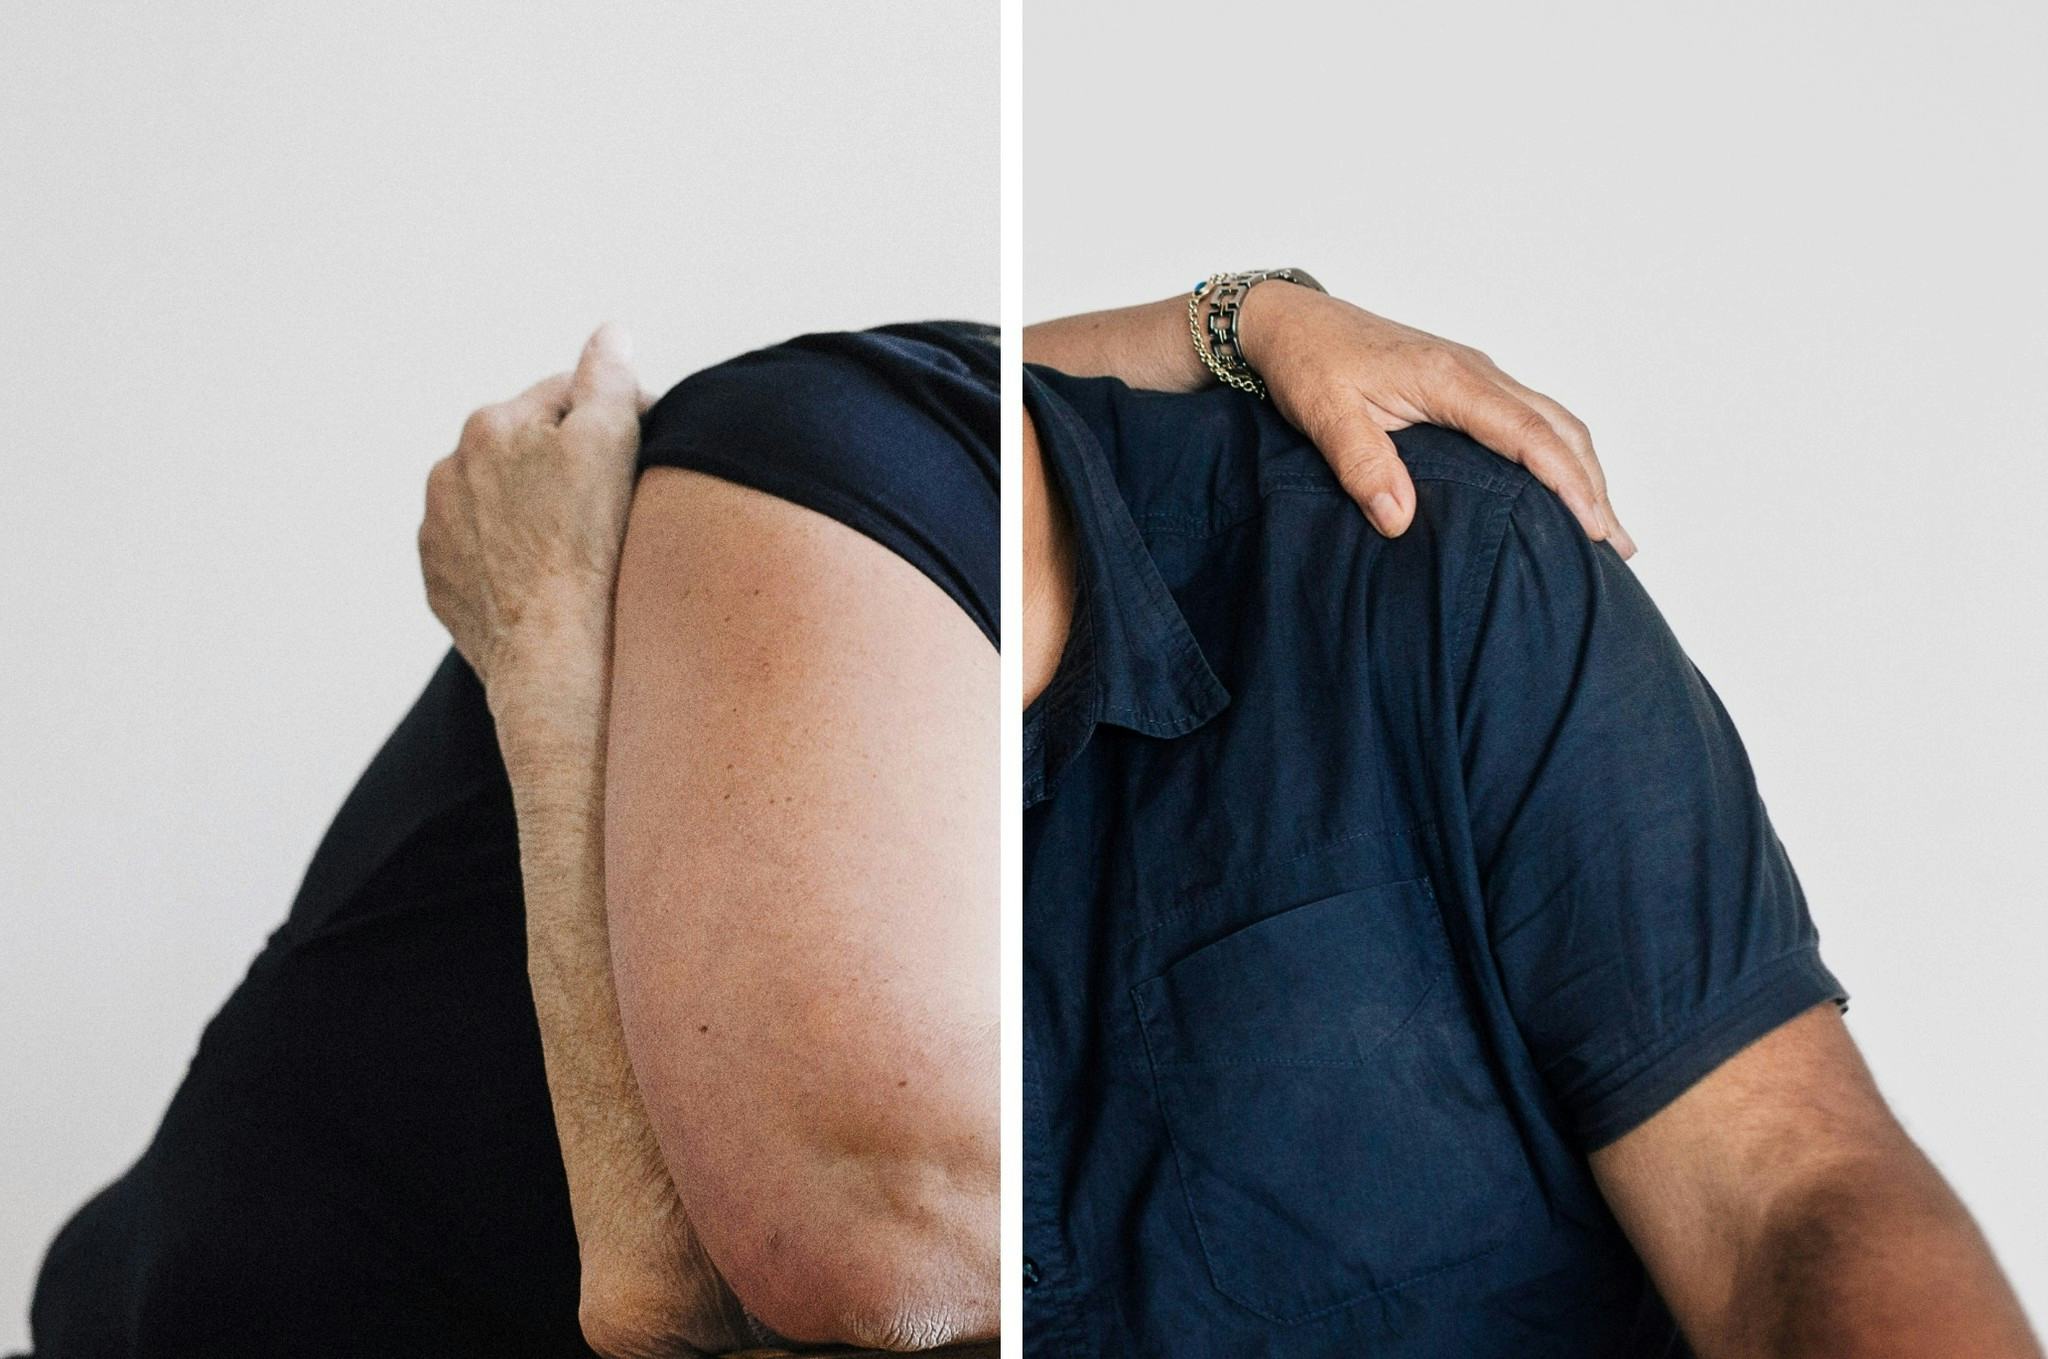 Diptych of two bodies embracing. Only torso and arms are visible